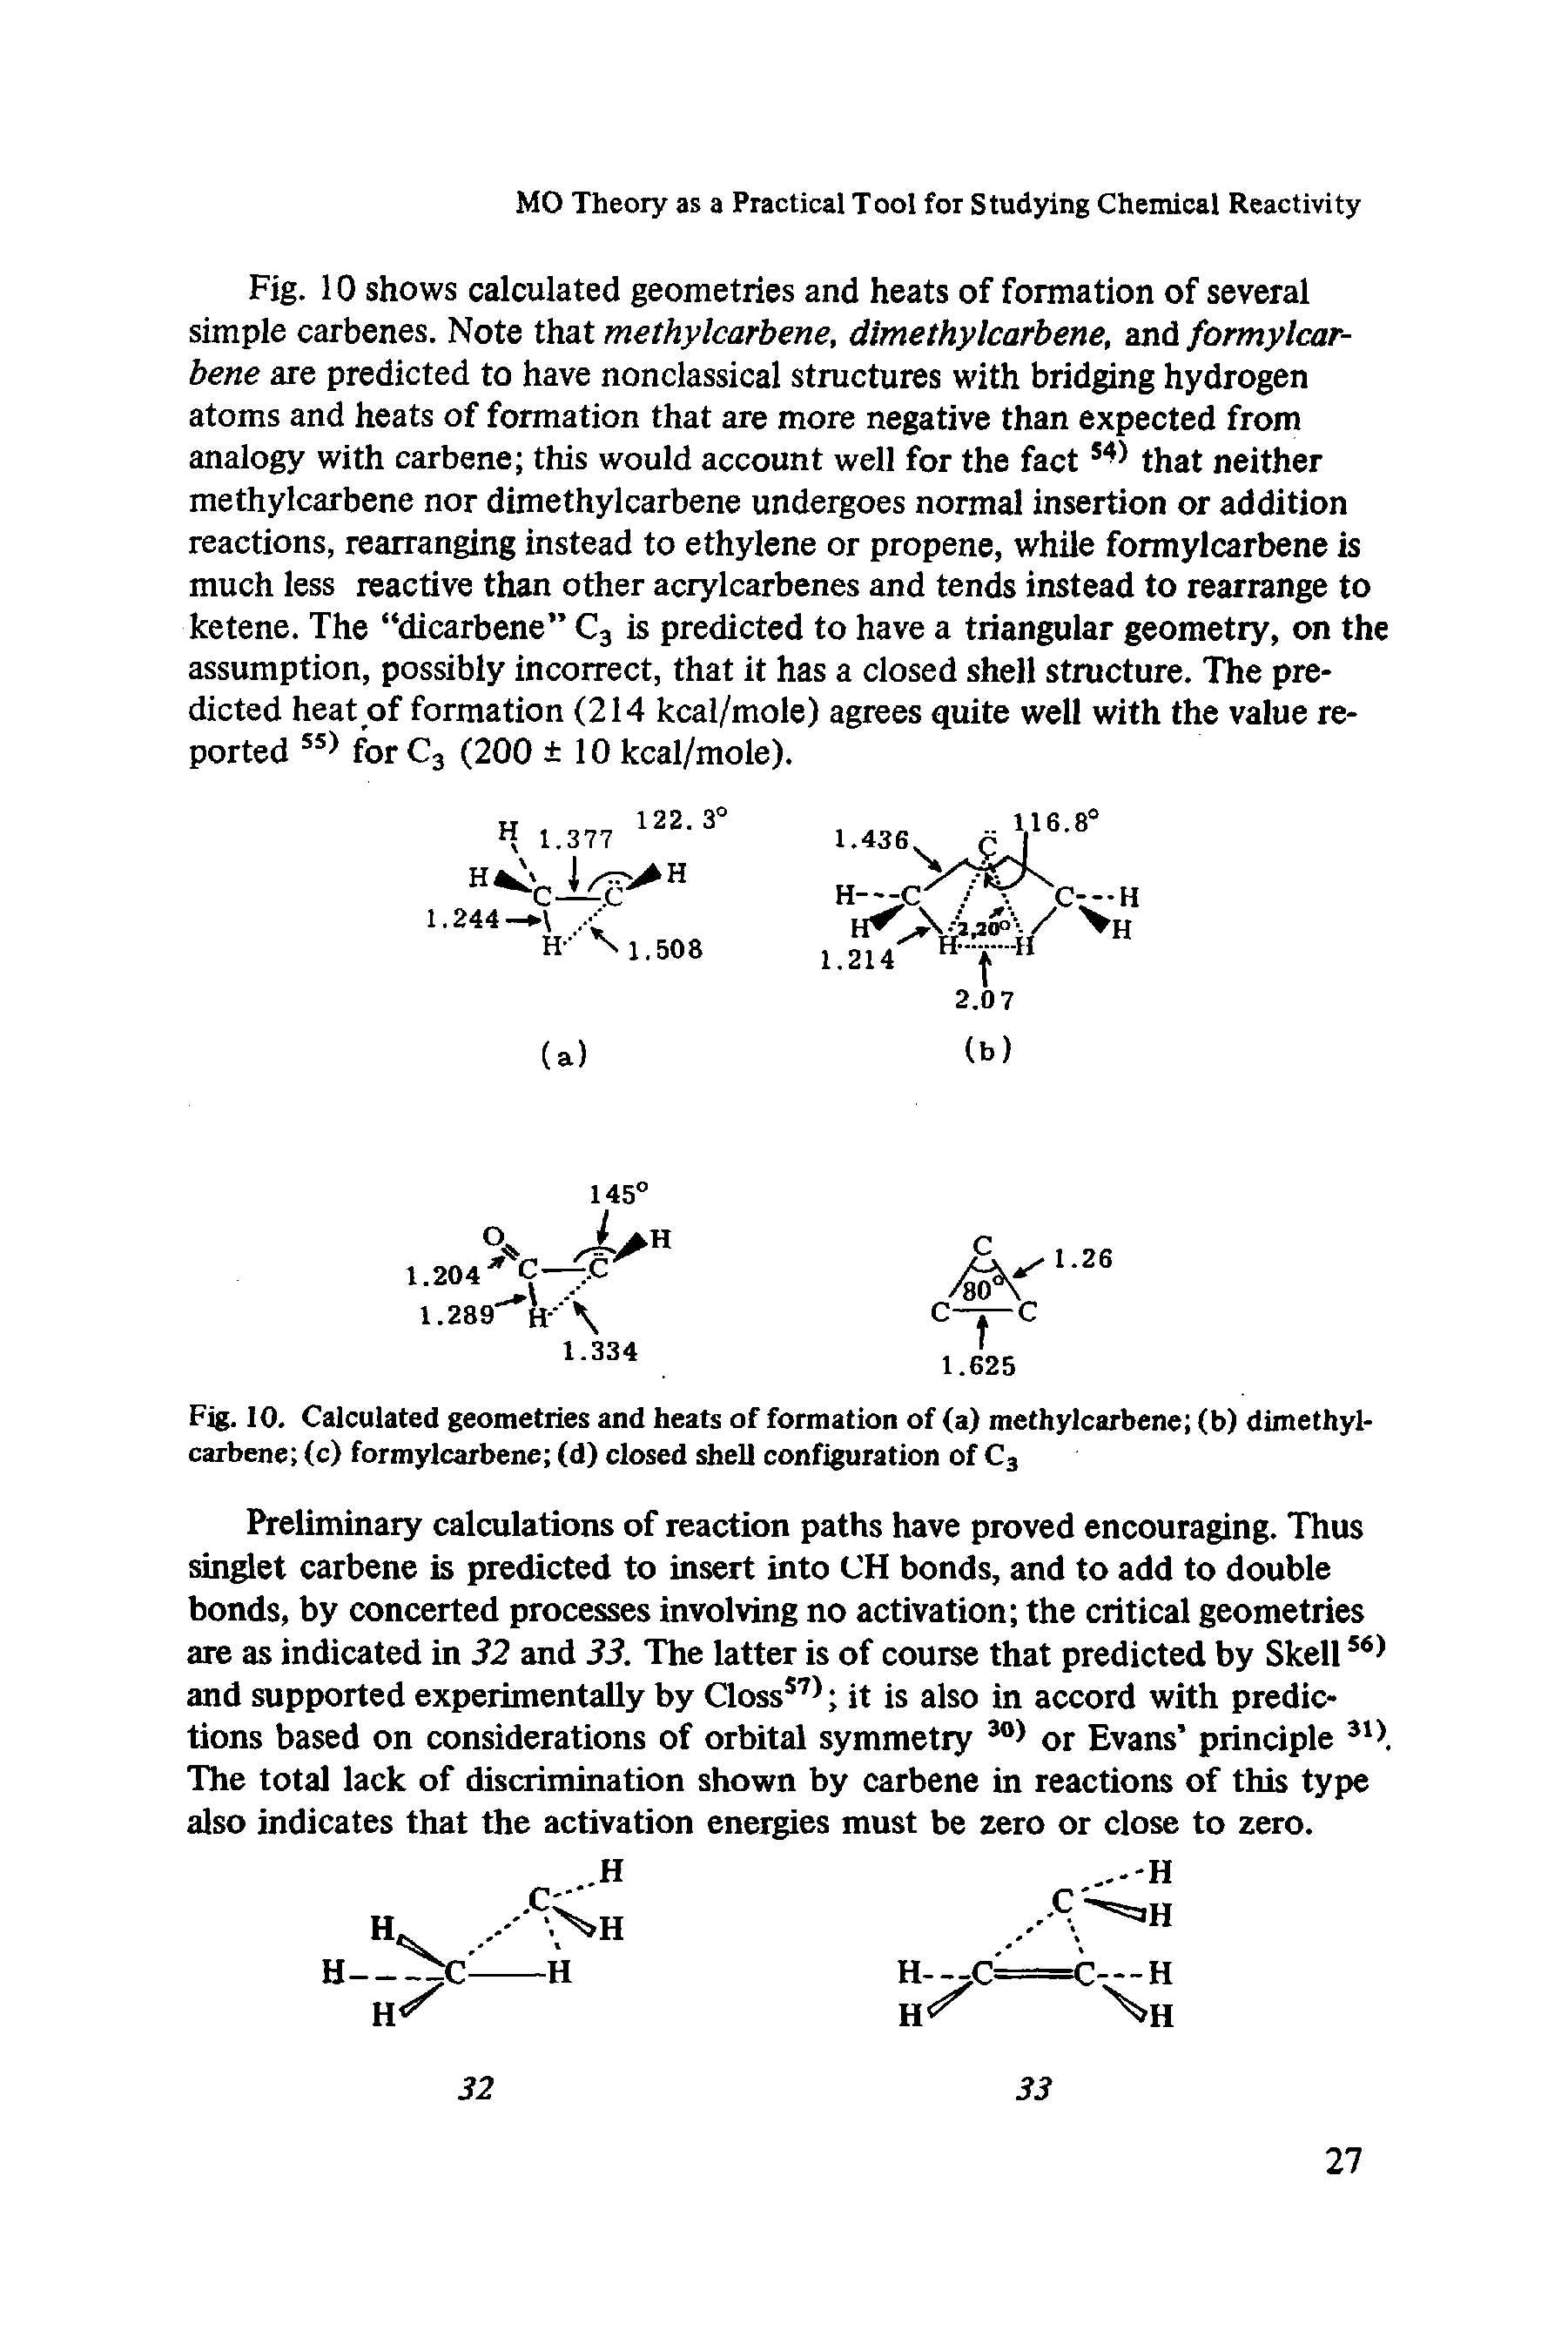 Fig. 10. Calculated geometries and heats of formation of (a) methylcarbene (b) dimethylcarbene (c) formylcarbene (d) closed shell configuration of C3...